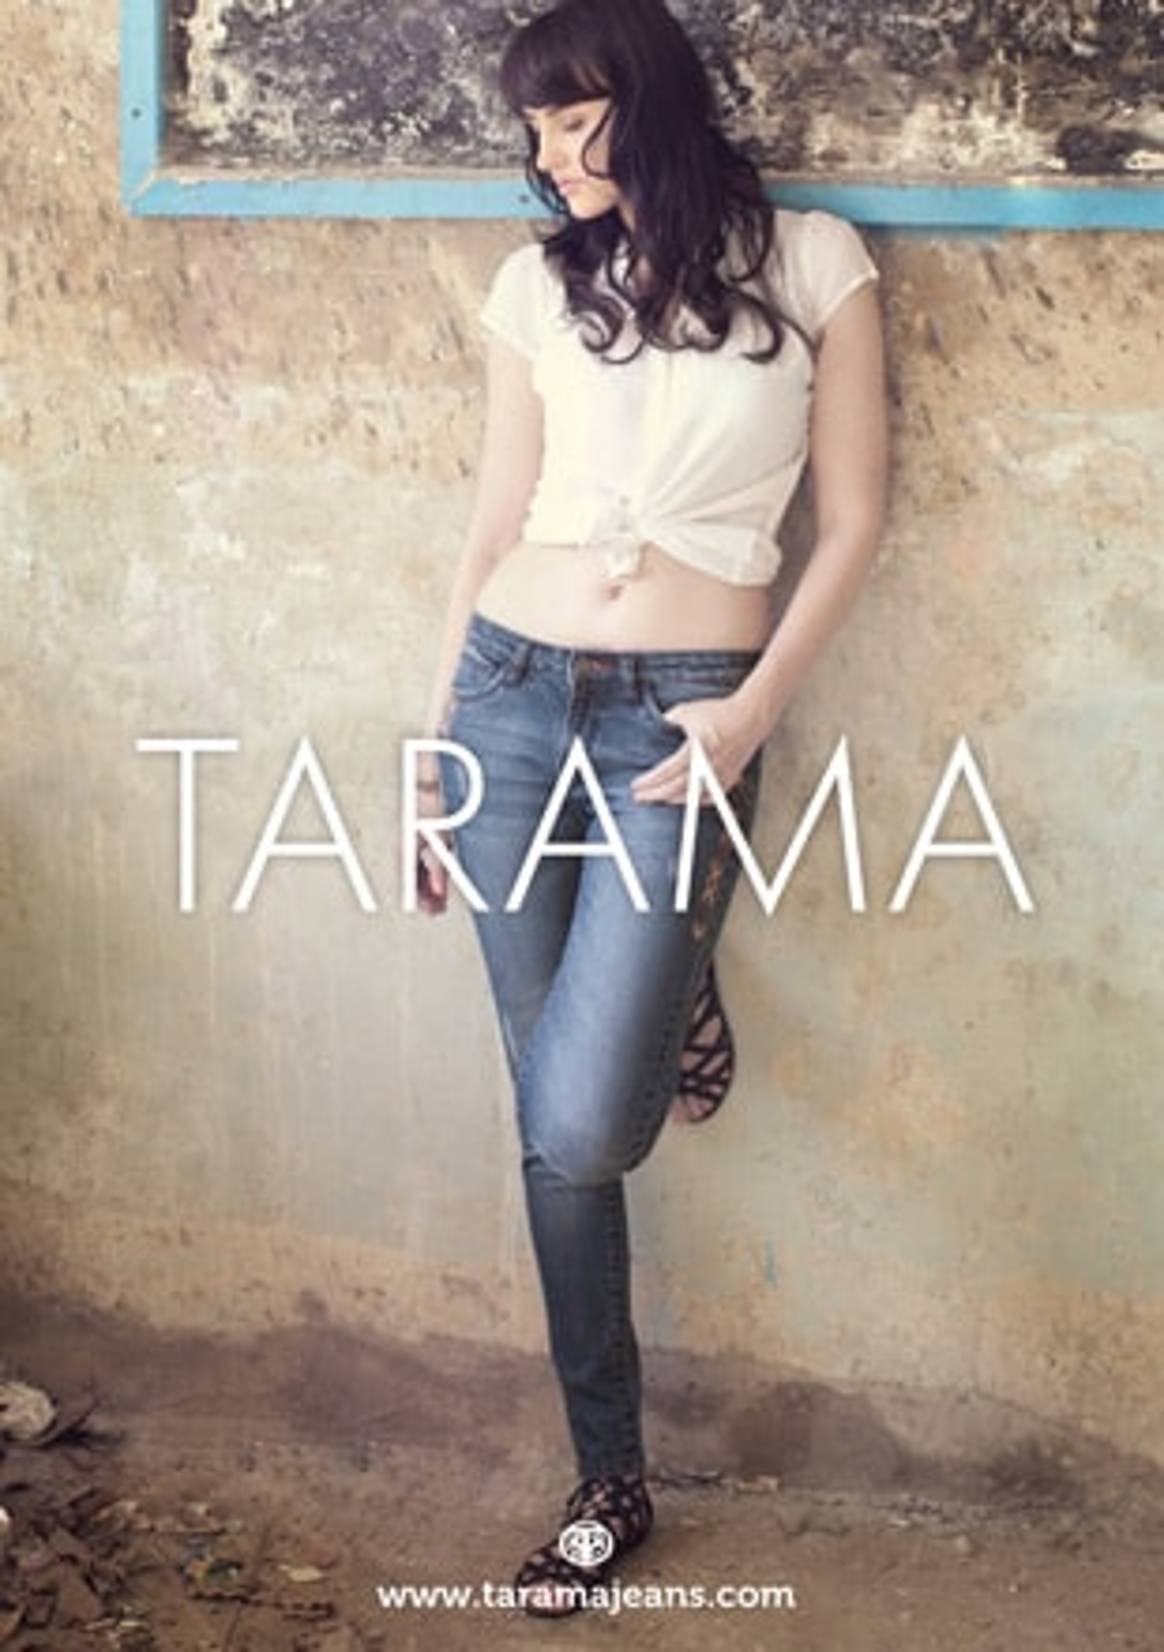 Tarama woos women with new styles every day